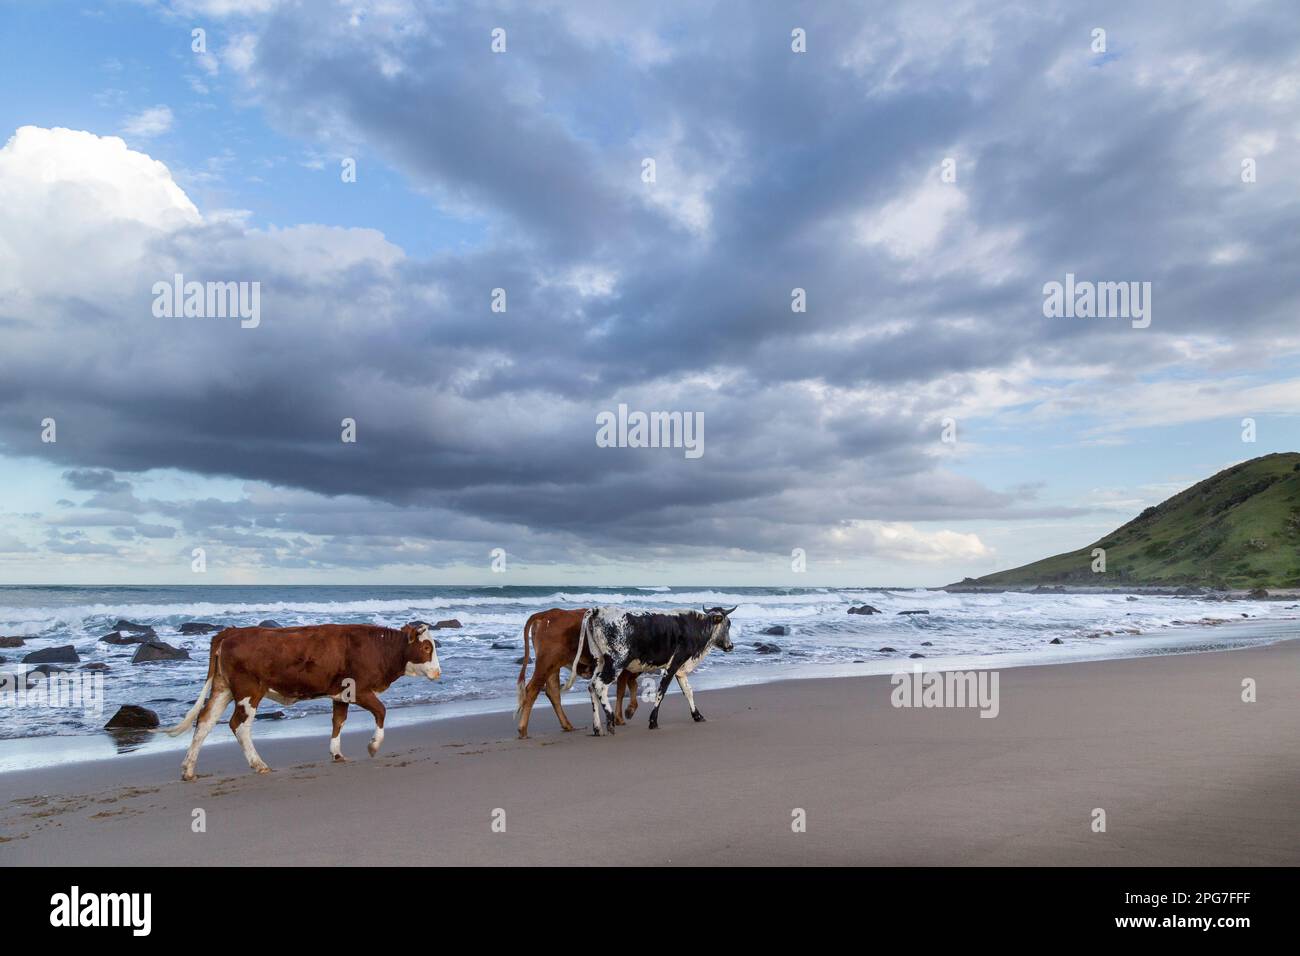 Scenic view of three cows walking on a Transkei beach under a moody sky Stock Photo